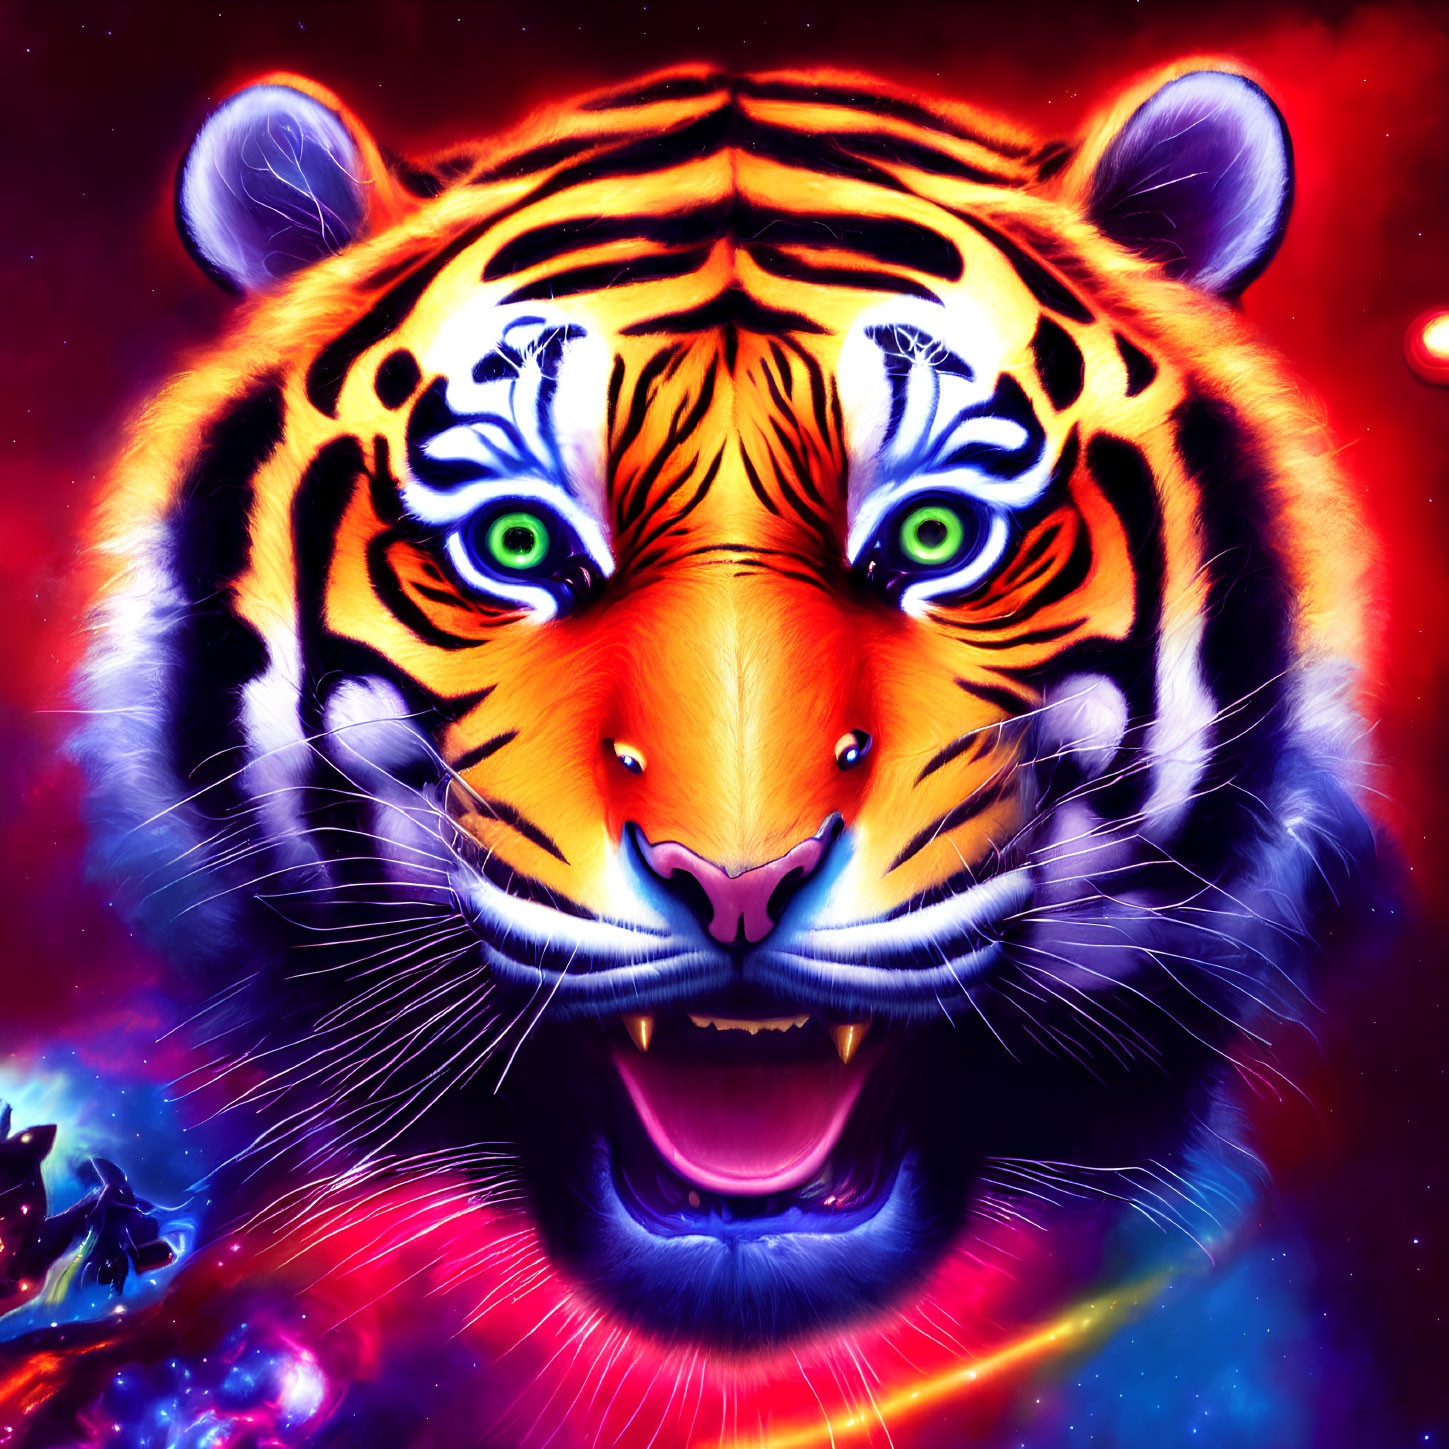 Colorful Tiger Face Artwork with Cosmic Background